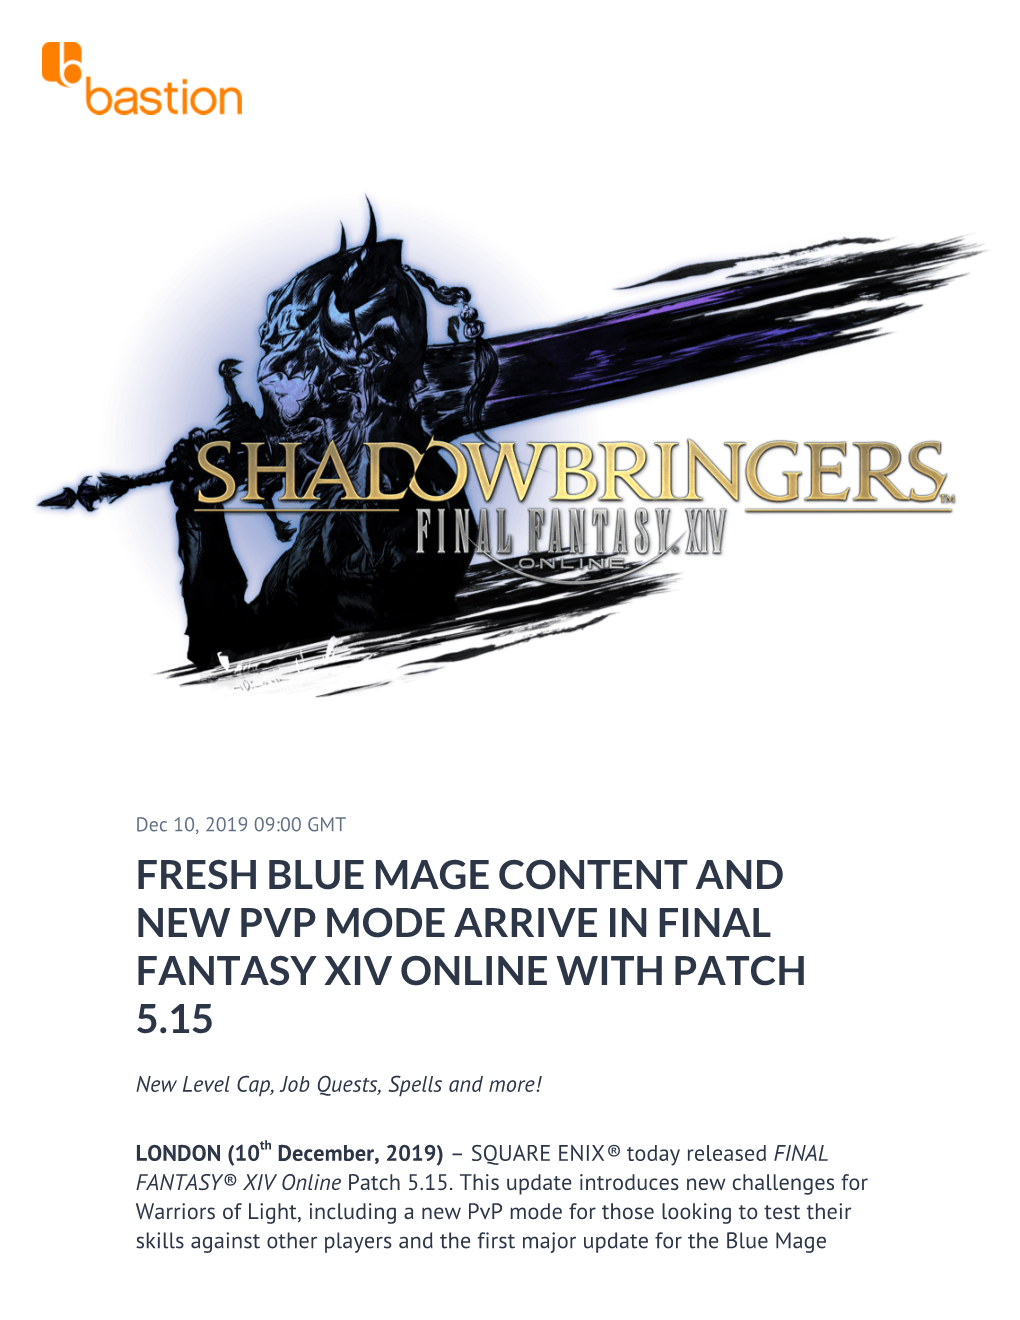 Fresh Blue Mage Content and New Pvp Mode Arrive in Final Fantasy Xiv Online with Patch 5.15